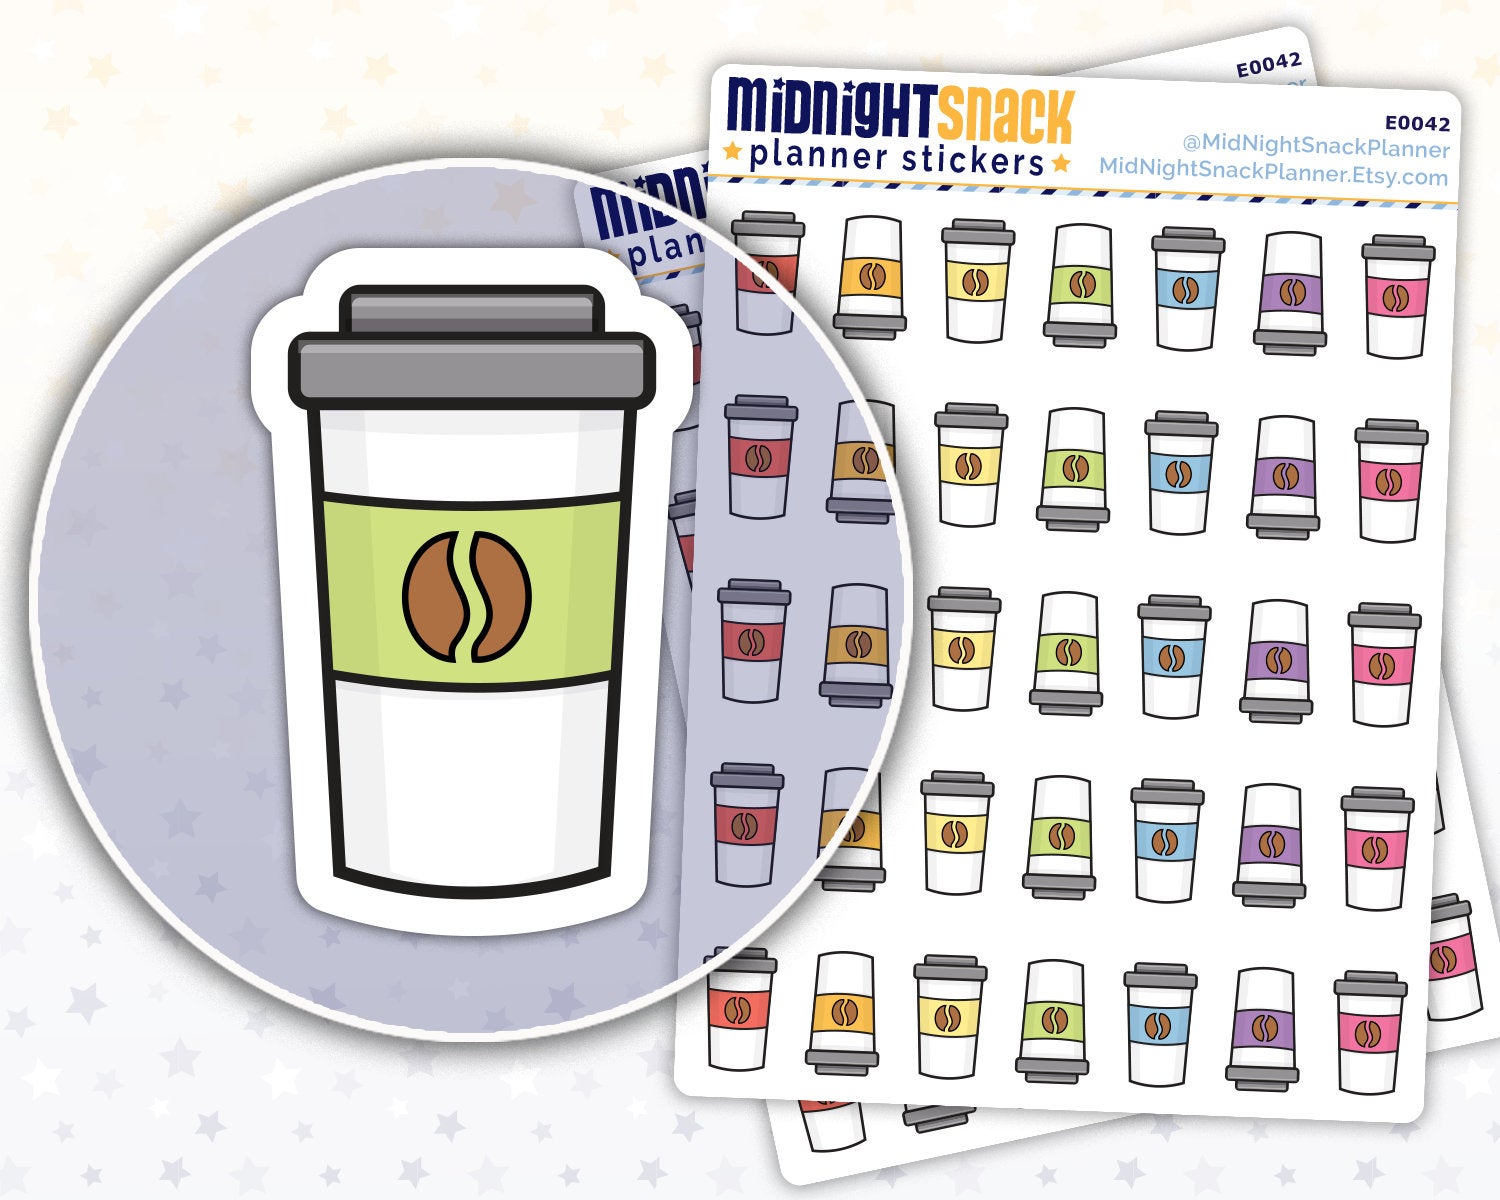 Order Coffee Icon: Meal Planning Planner Stickers Midnight Snack Planner